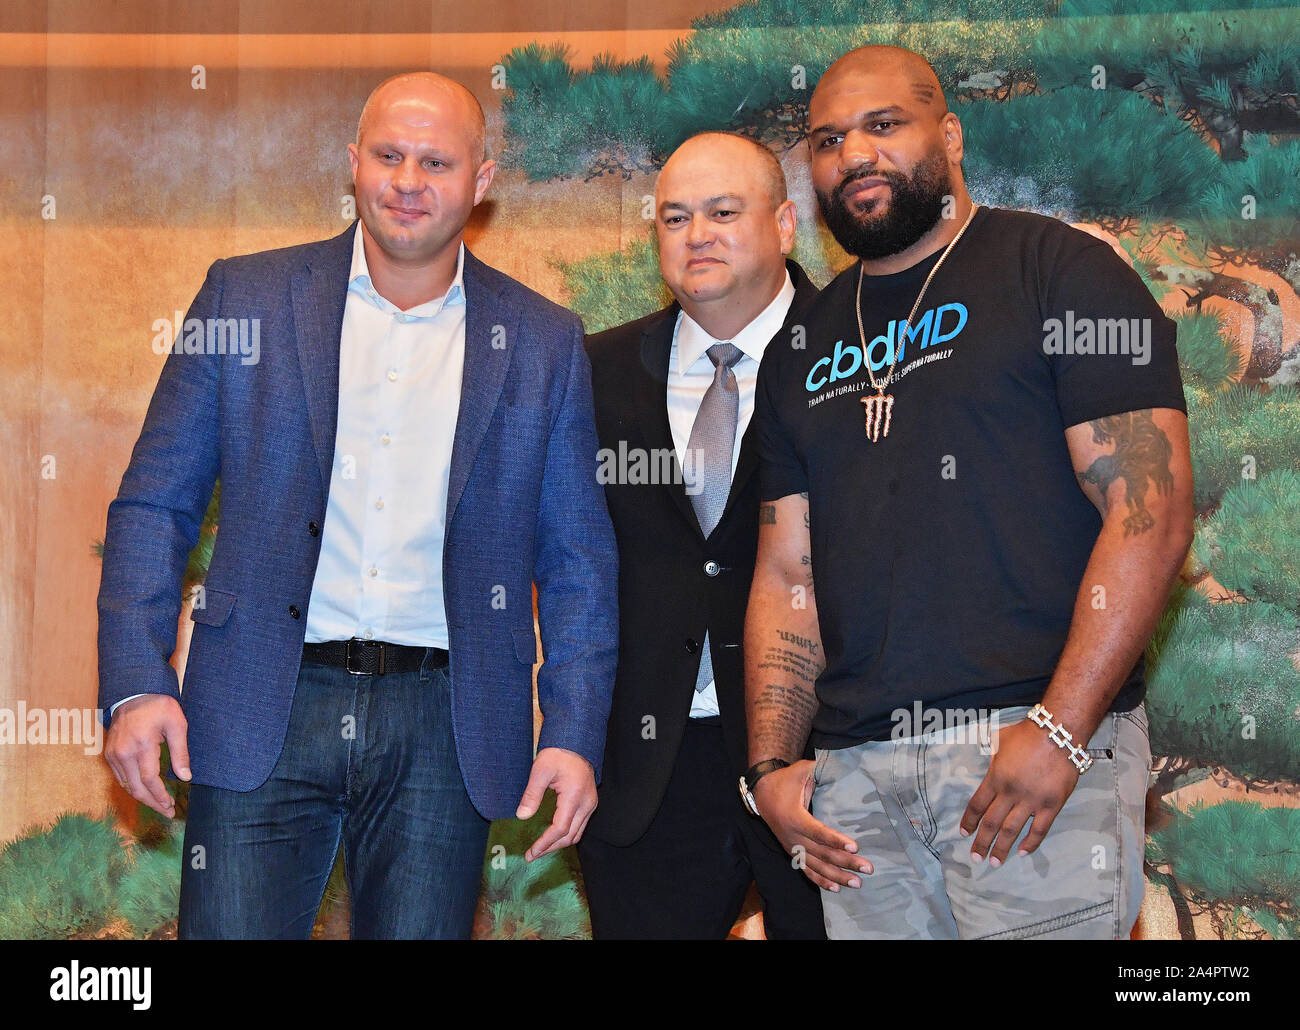 (L-R) Mixed martial arts fighter Fedor Emelianenko, Bellator MMA President Scott Coker and Mixed martial arts fighter Quinton Jackson attend the Press Conference for Bellator and RIZIN match at the Meguro Gajoen Hotel in Tokyo, Japan on October 9, 2019. Stock Photo